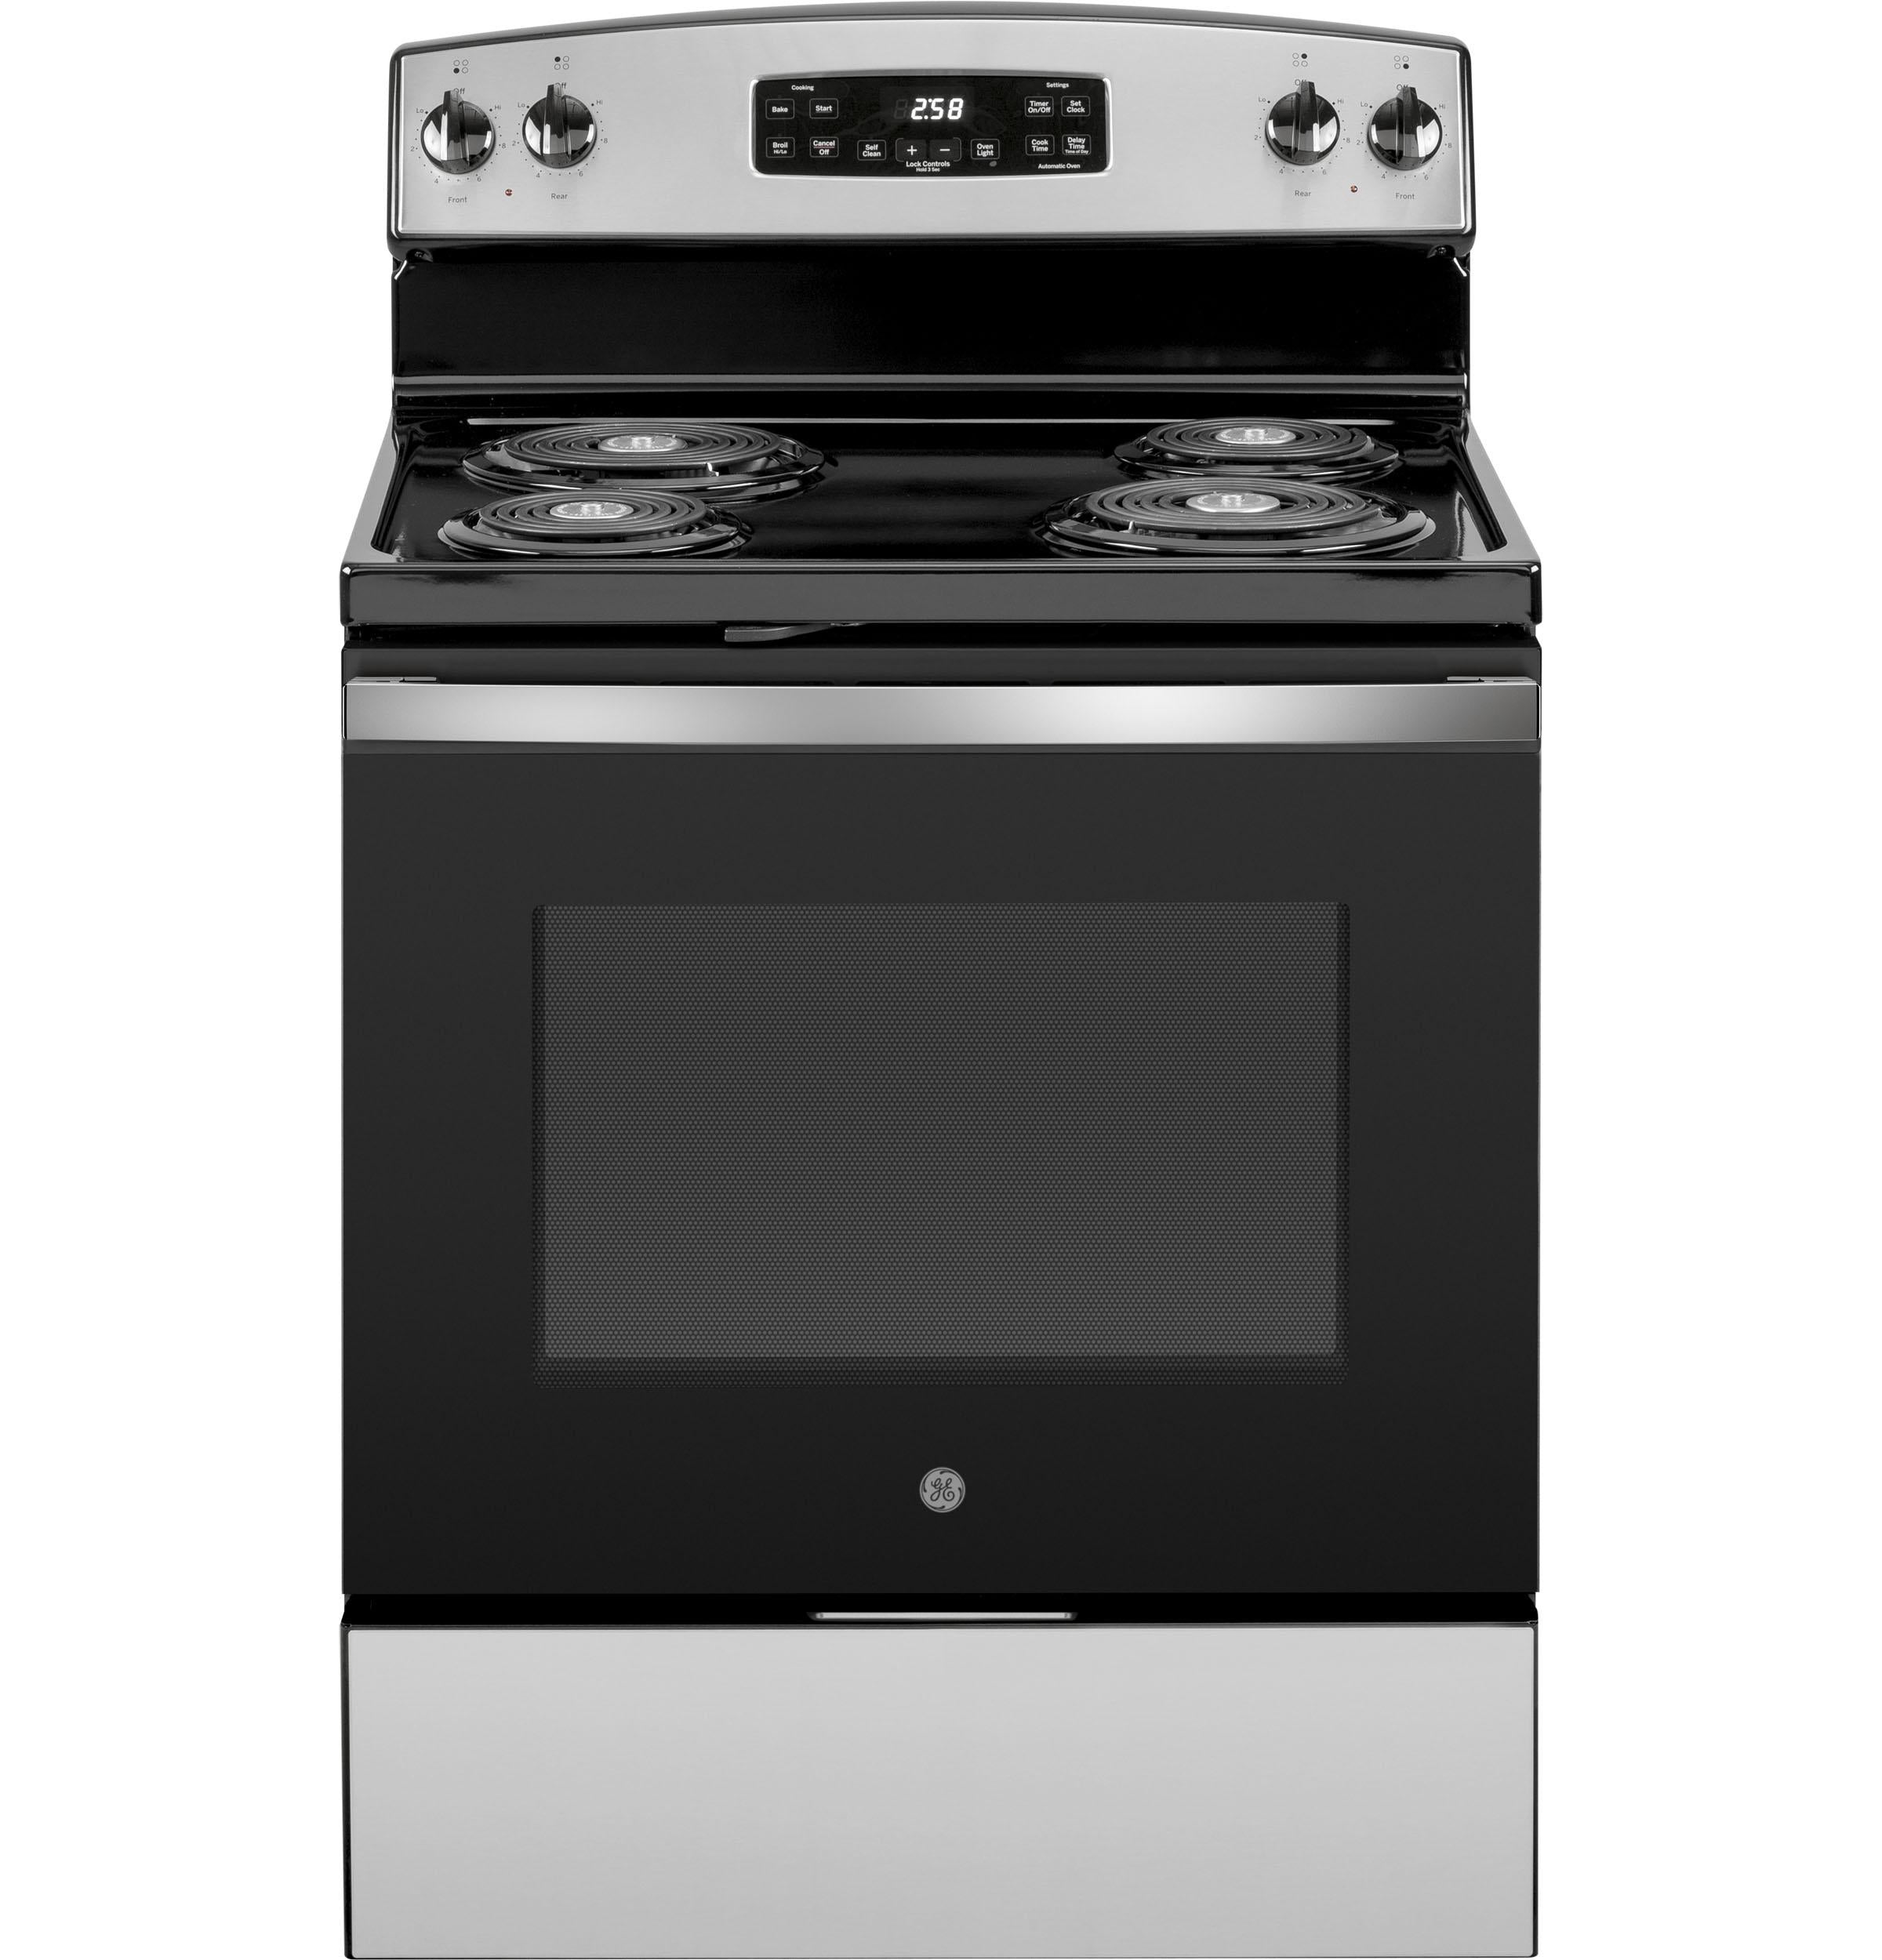 Oven with adjustable temperature and timer, equipped with two baking  elements, indicator bell, and automatic shutdown function